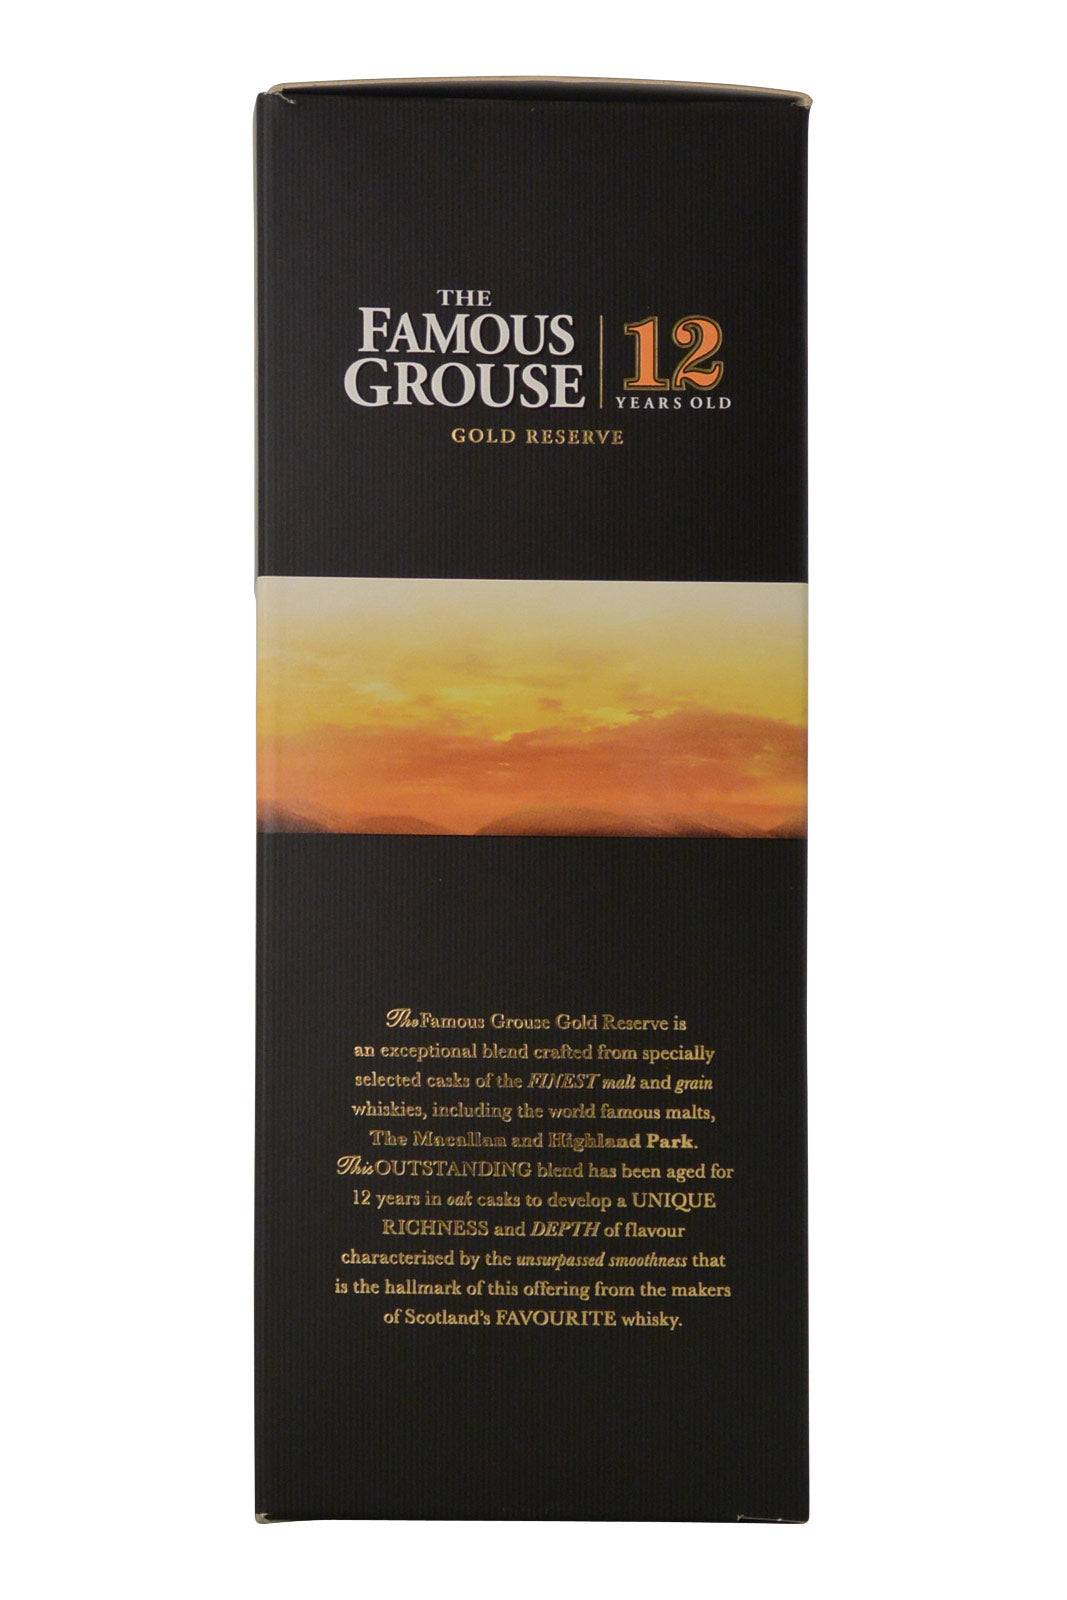 The Famous Grouse 12 Year Old